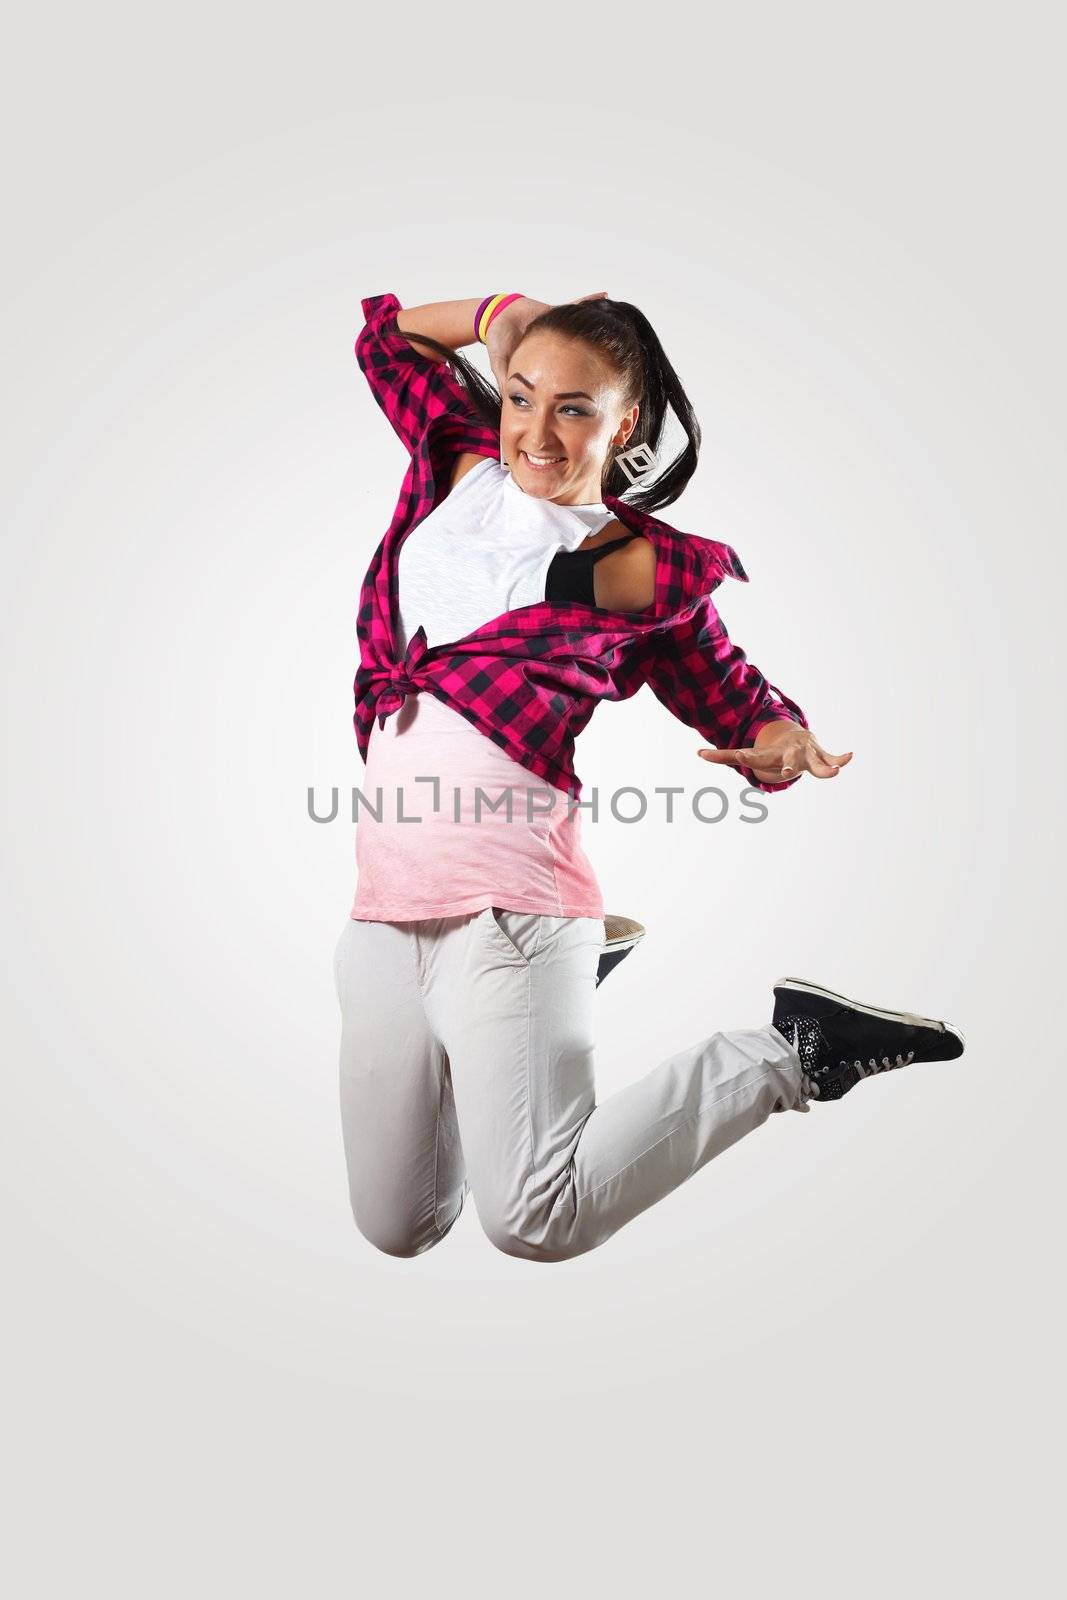 Young hiphop dancer making a move on white